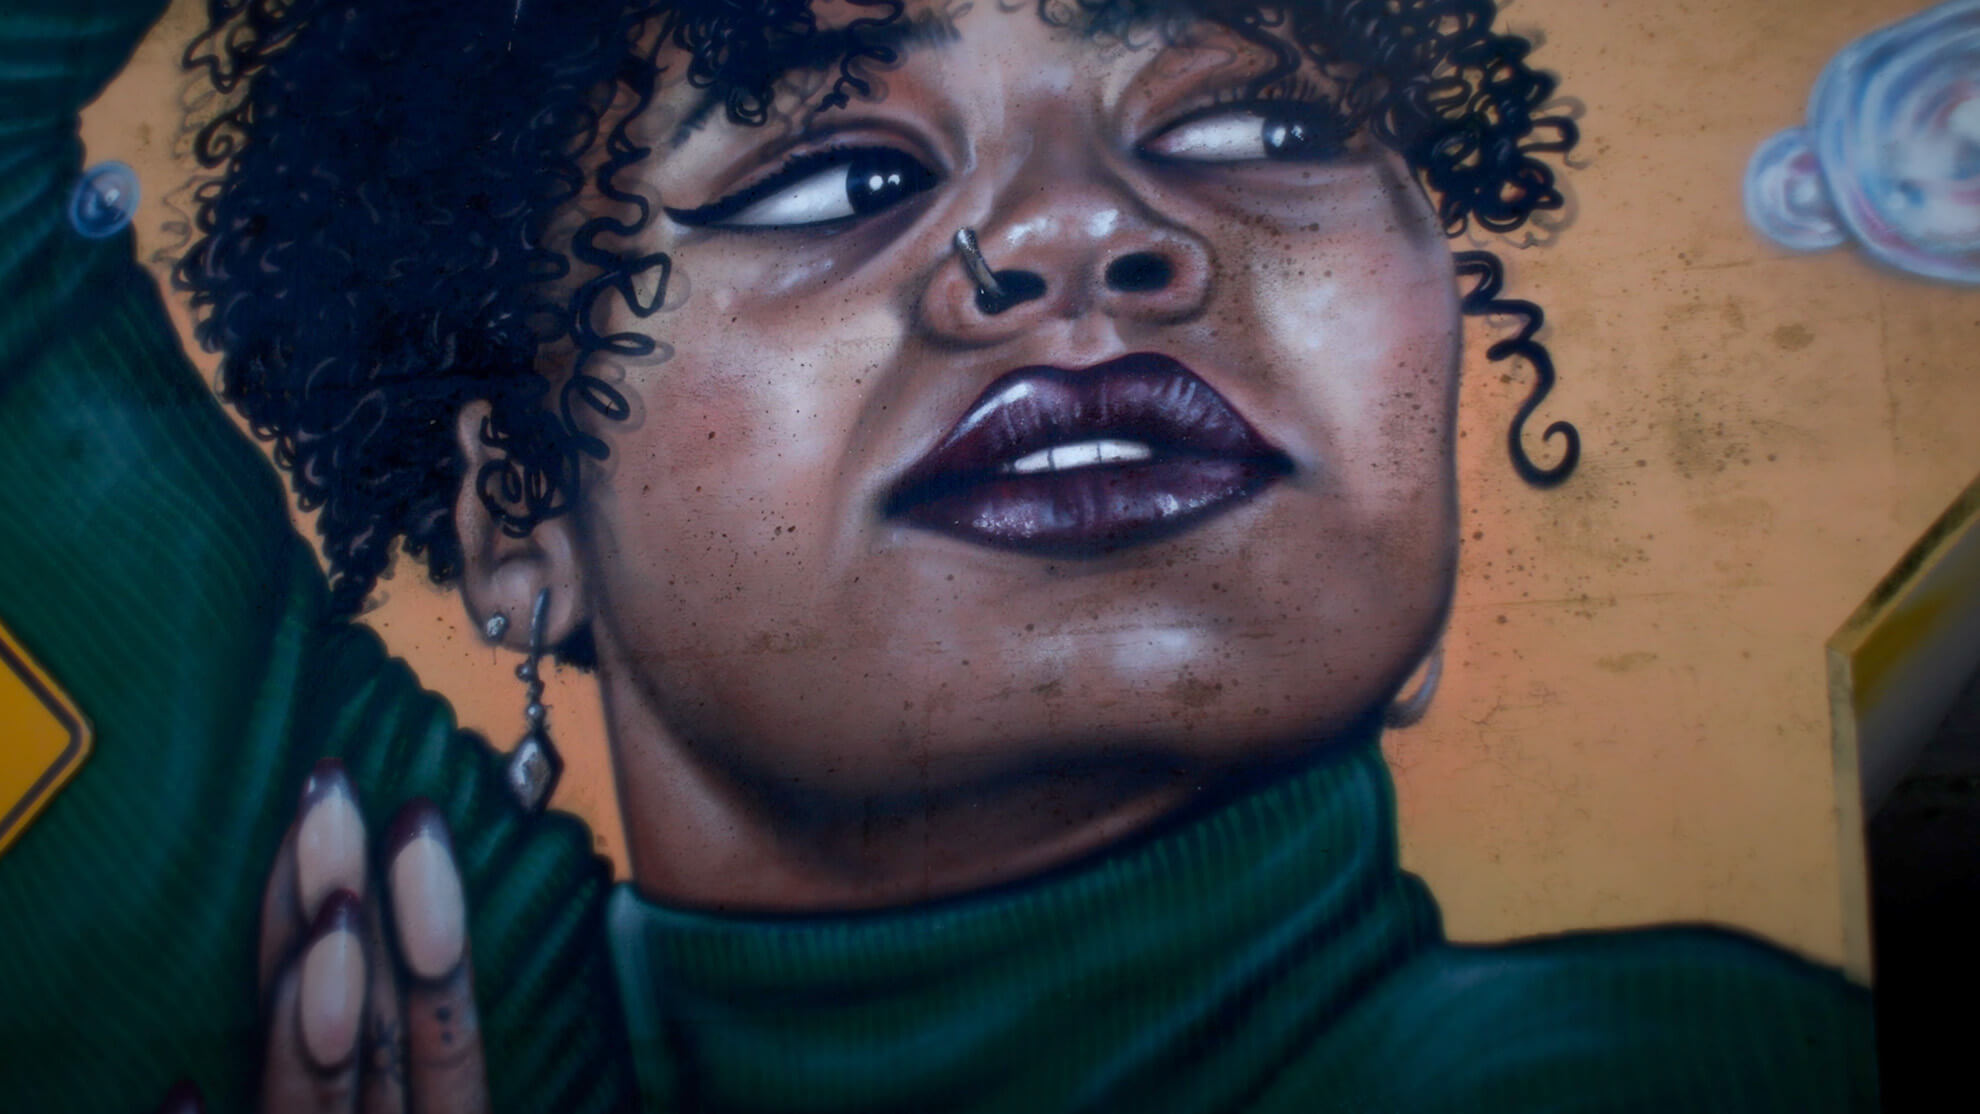 A dark-skinned Black woman with coiled hair and a nose piercing looks off into the distance in this close-up. She is wearing a deep forest green turtleneck and is also partially framed by bubbles on an ochre background.